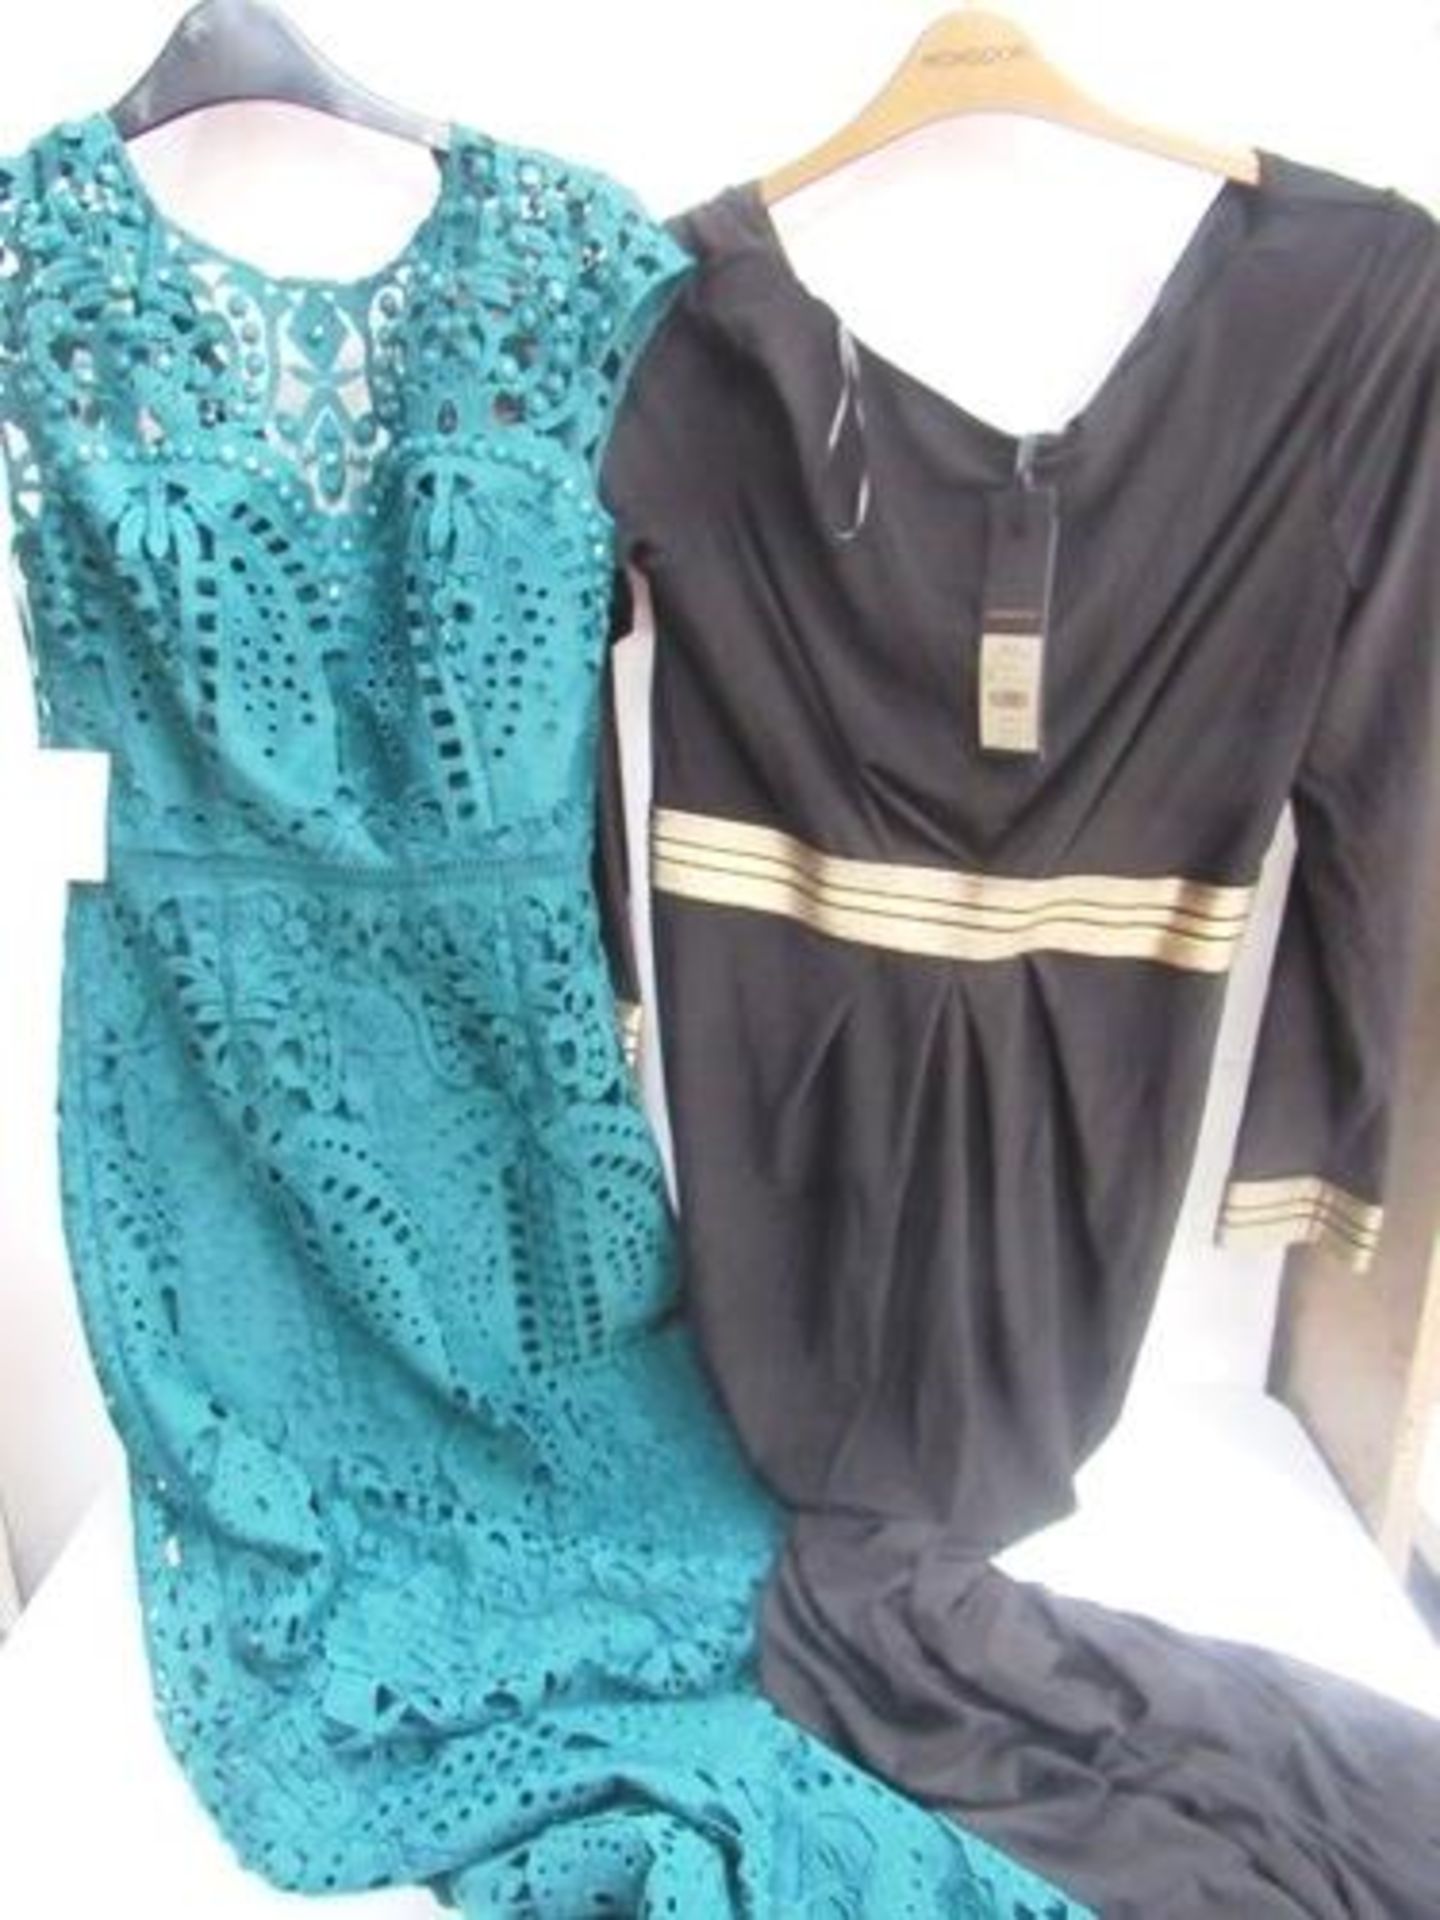 2x Phase 8 Collection evening maxi dresses, sizes 14 and 6 - New with tags (2C)